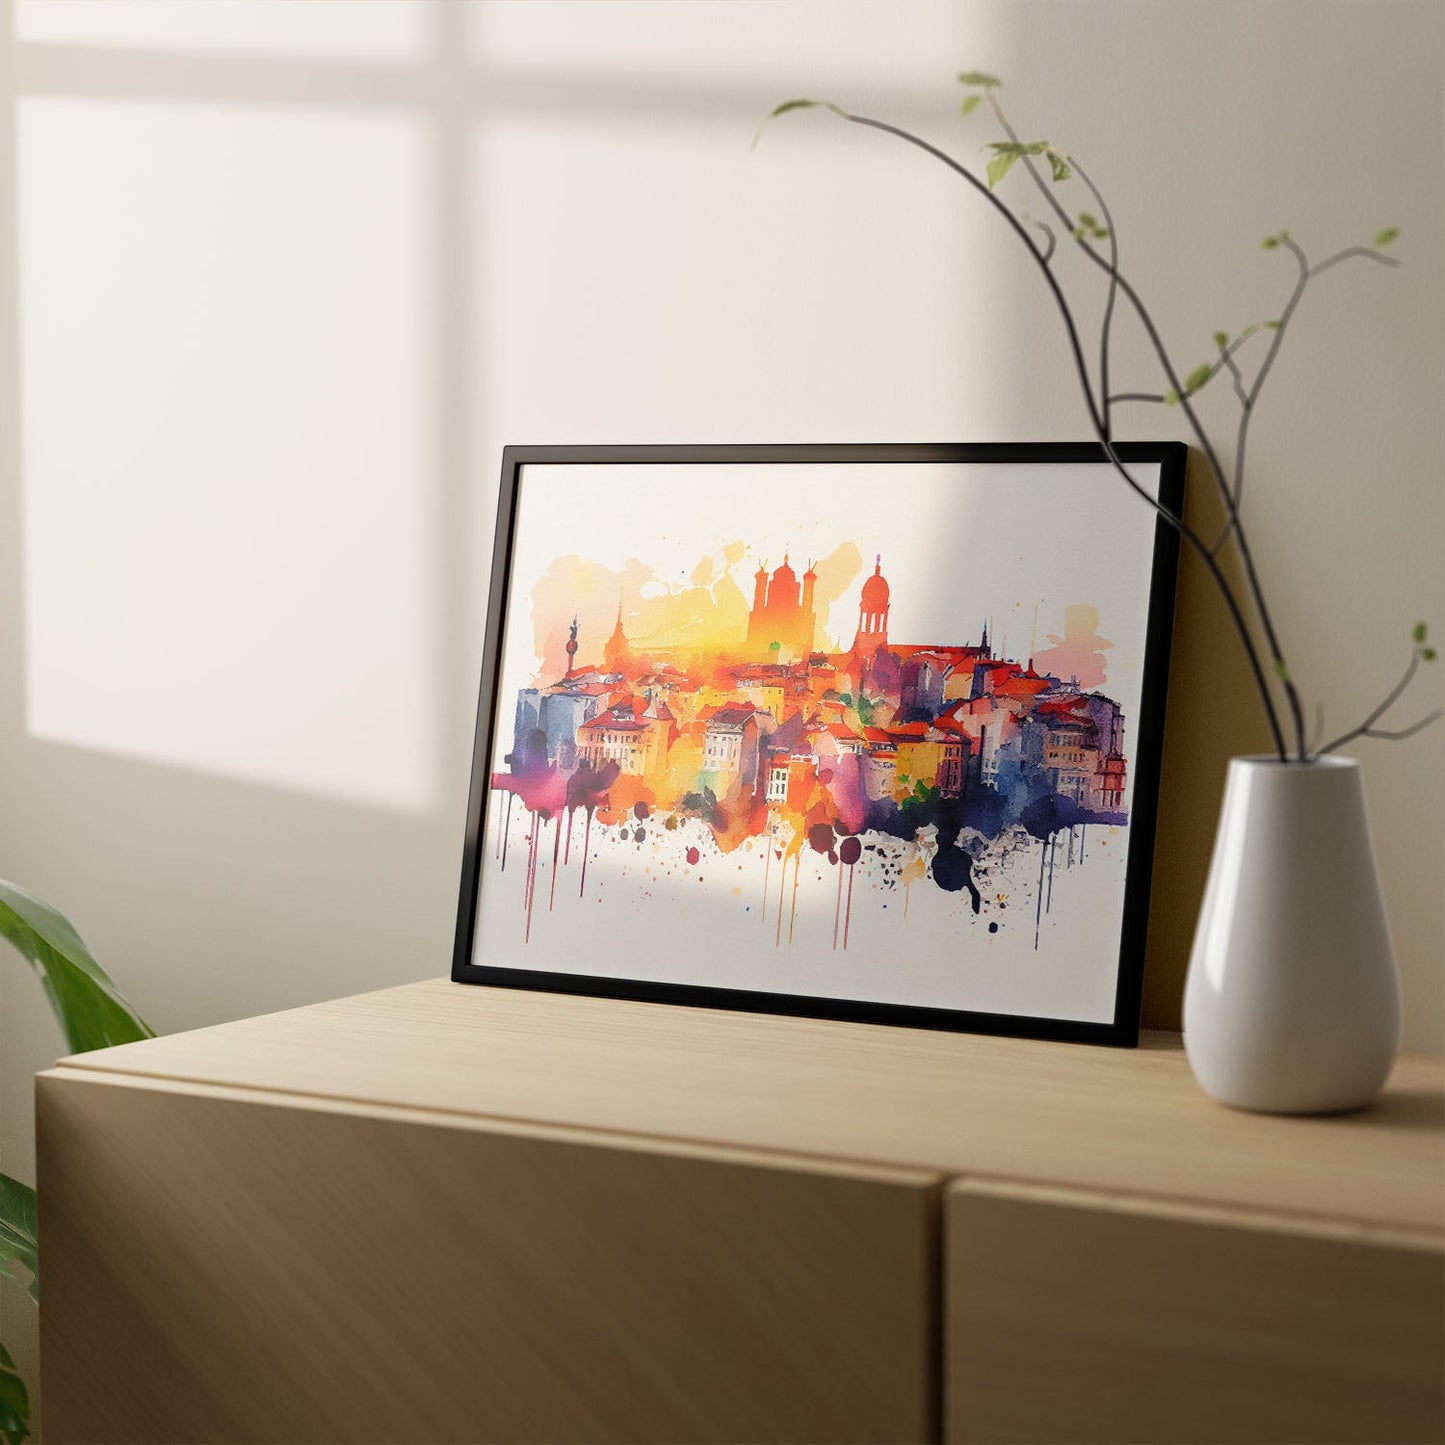 Nacnic watercolor of a skyline of the city of Lisbon_1. Aesthetic Wall Art Prints for Bedroom or Living Room Design.-Artwork-Nacnic-A4-Sin Marco-Nacnic Estudio SL